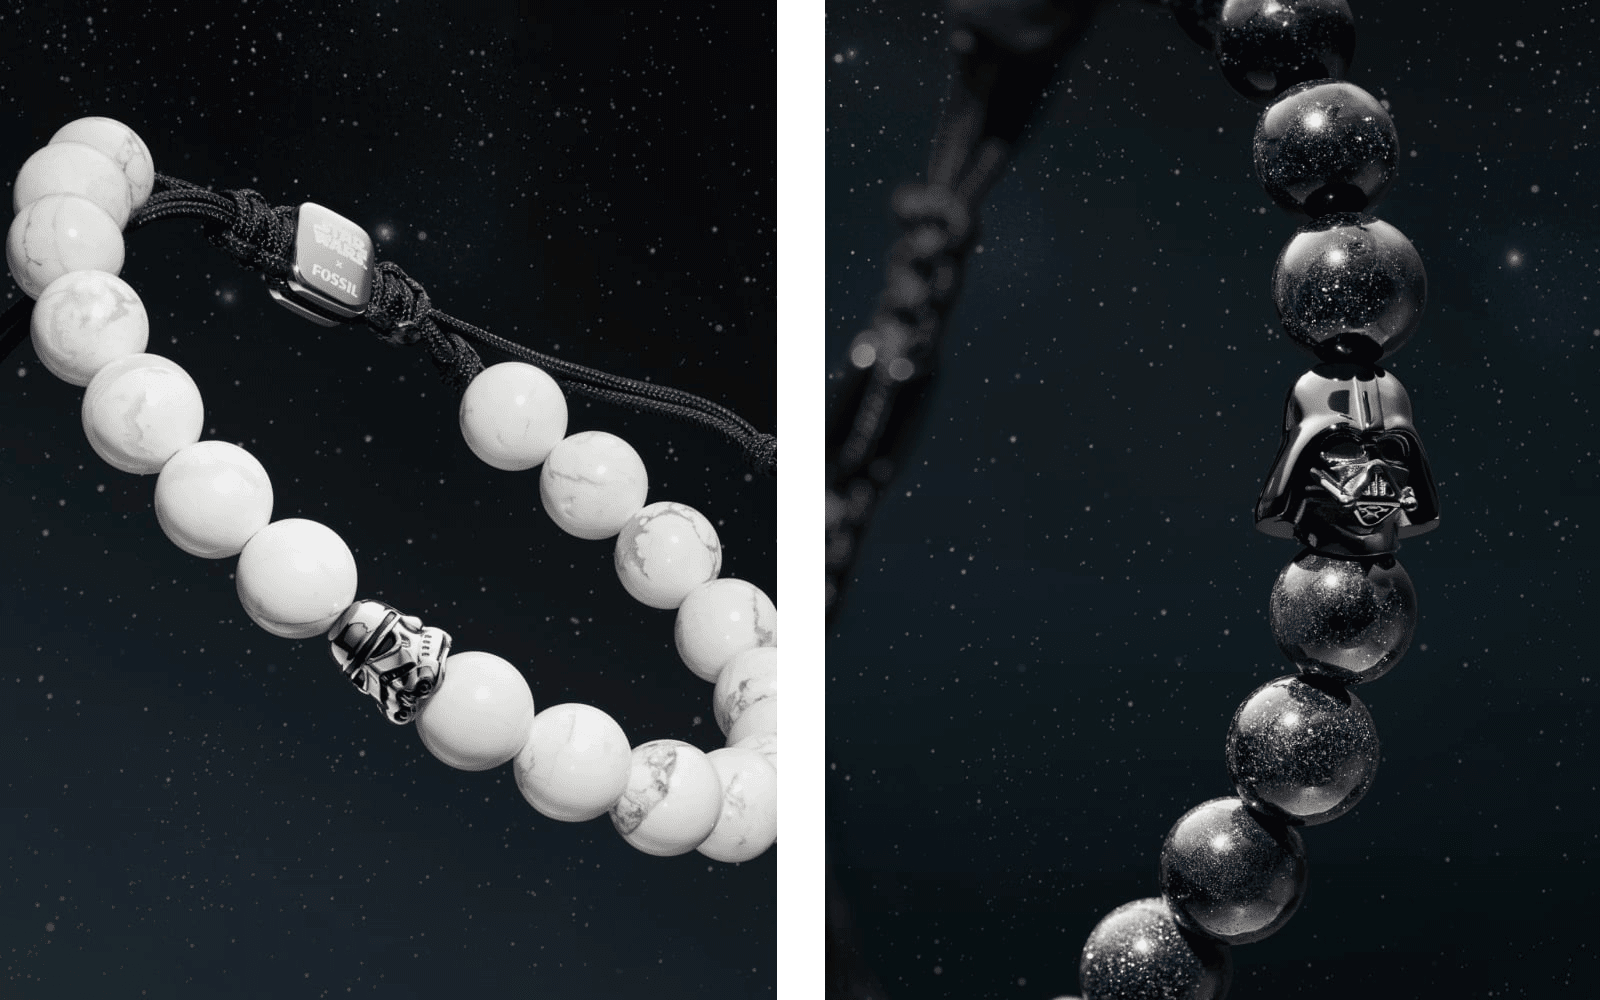 Side by side images of a white beaded bracelet with a stormtrooper helmet bead and a blue sandstone beaded bracelet with a Darth Vader helmet bead.